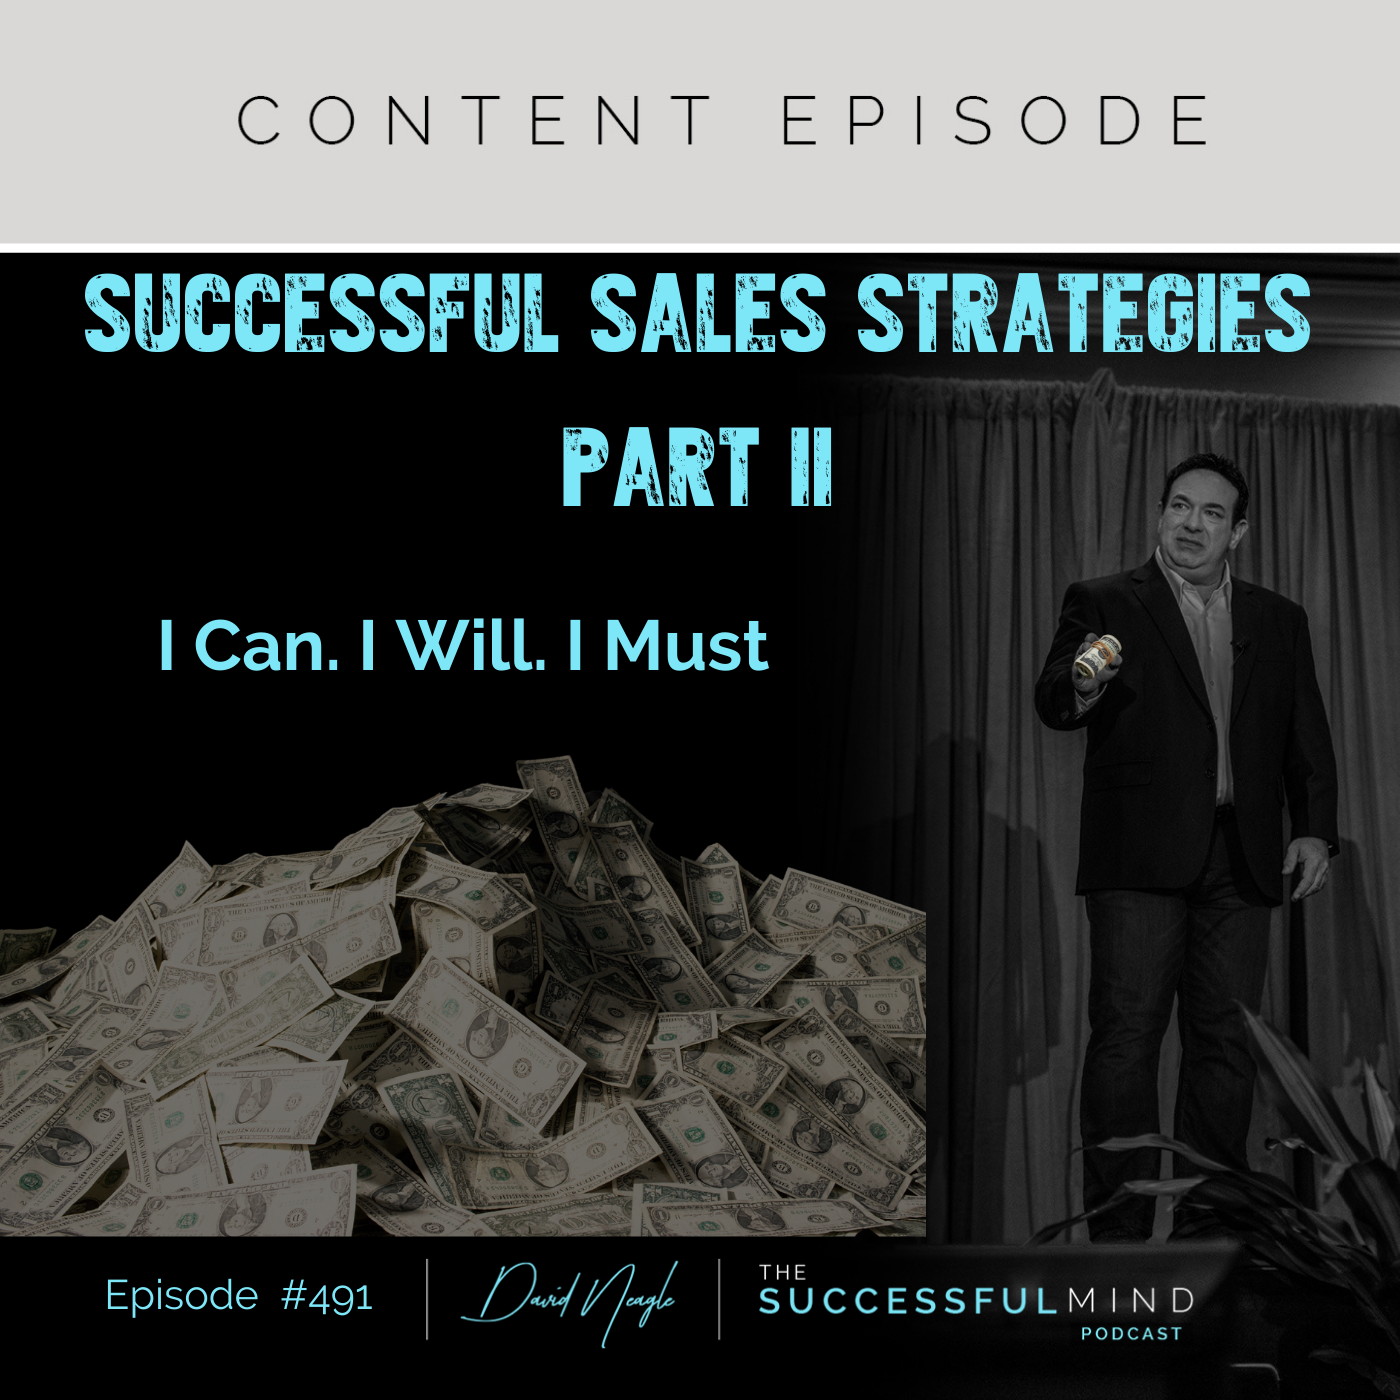 The Successful Mind Podcast - Episode 491 - Successful Sales Strategies Part II - I Can. I Will. I Must.